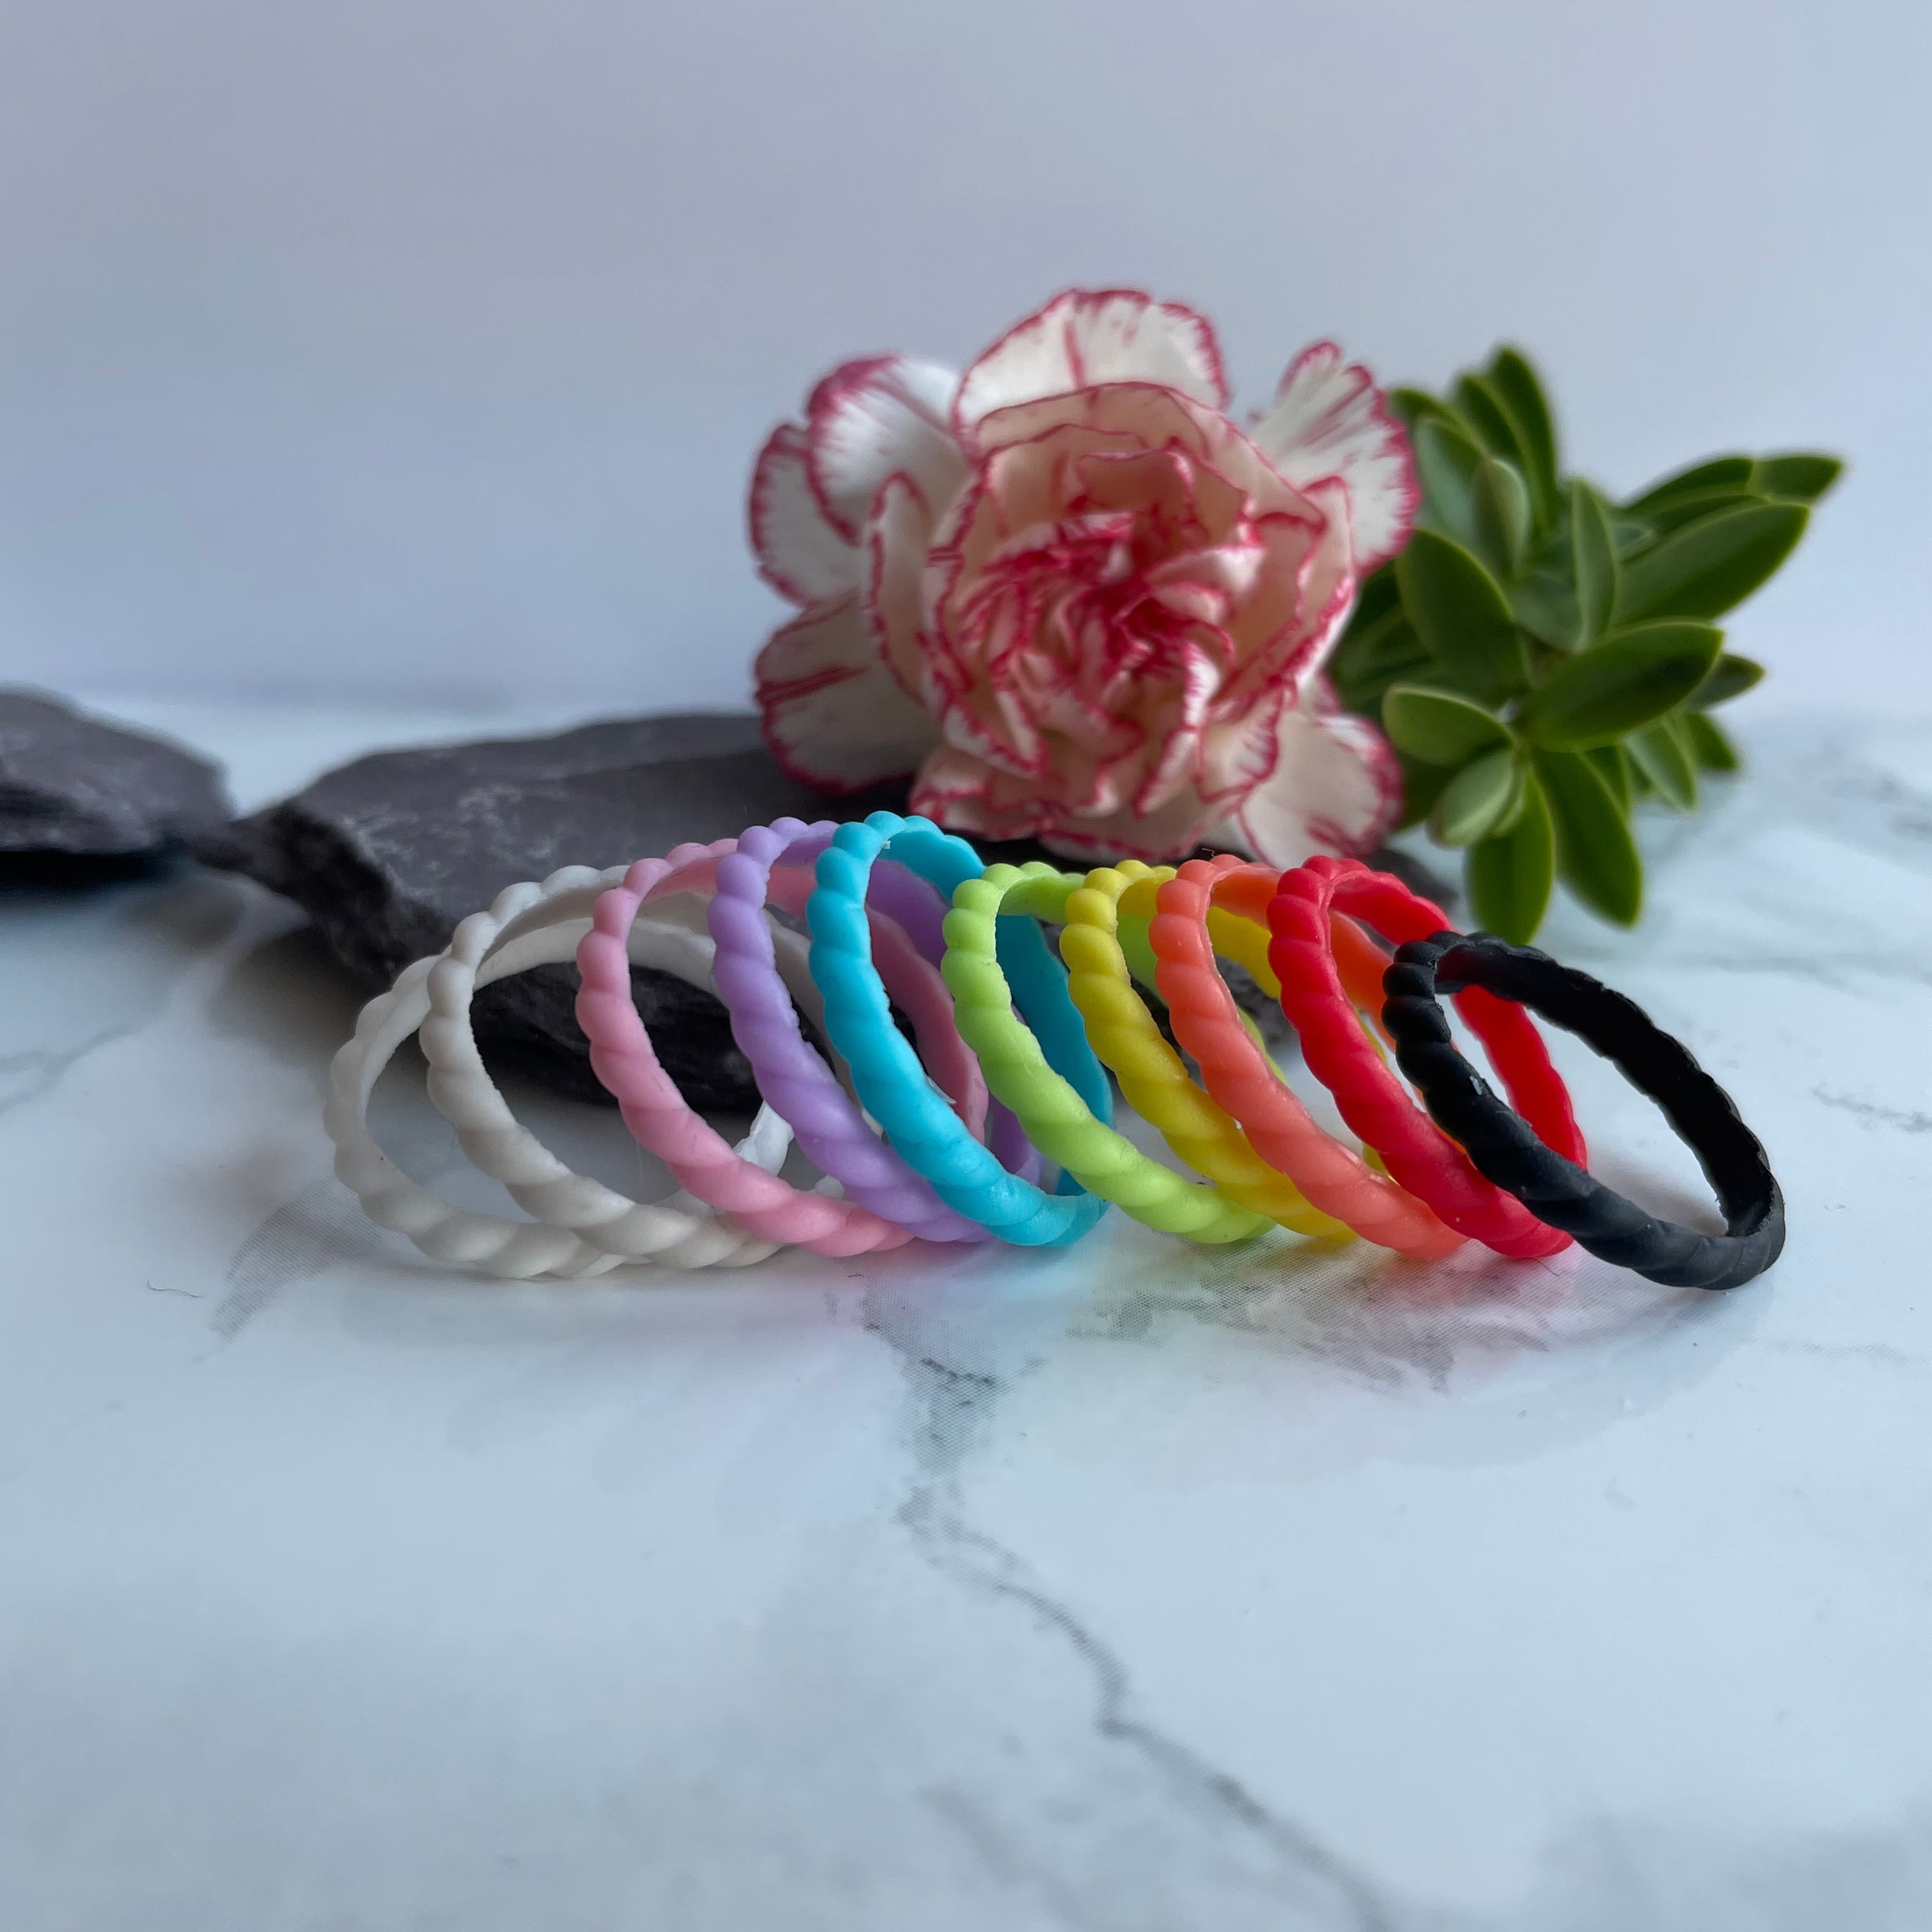 Selection of think braided silicone rings and bands